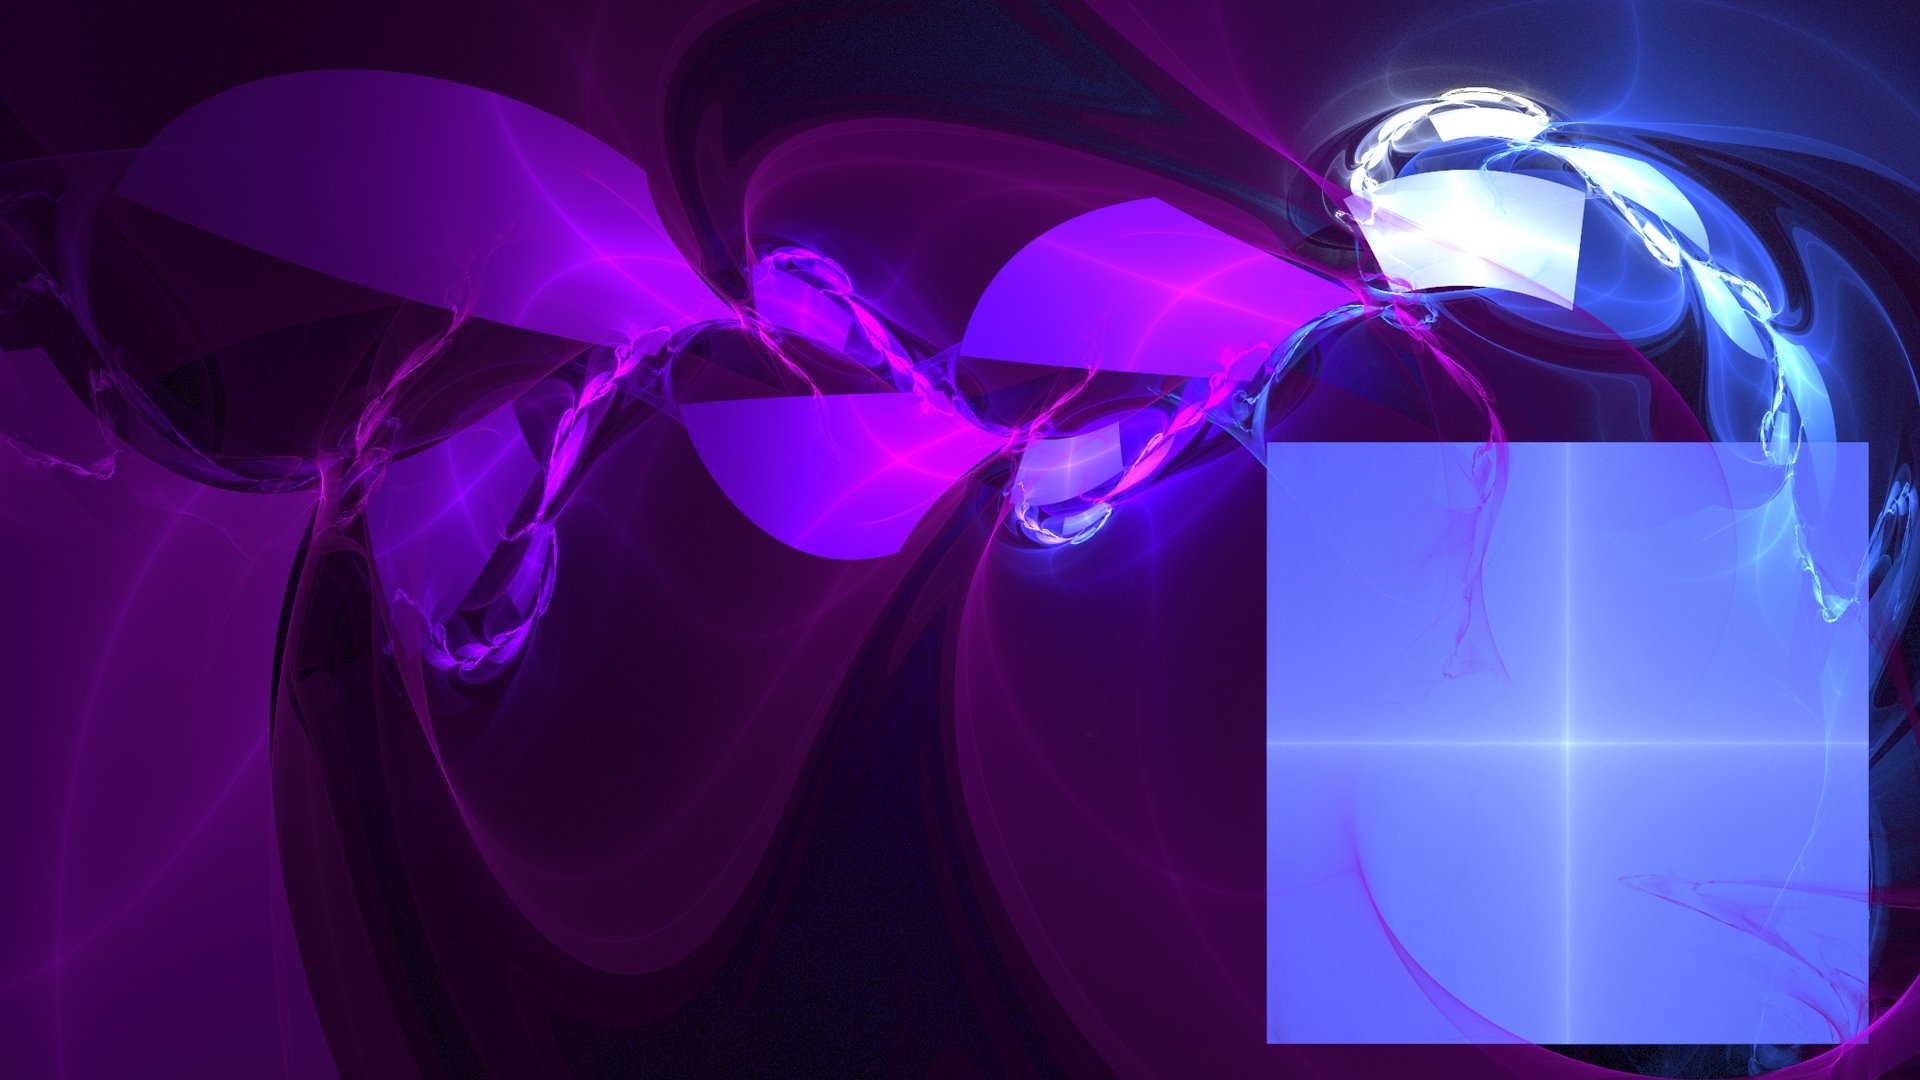 abstract, Art, 3d, Colors, Theme, Colorful, Light, Design, Illustration Wallpaper